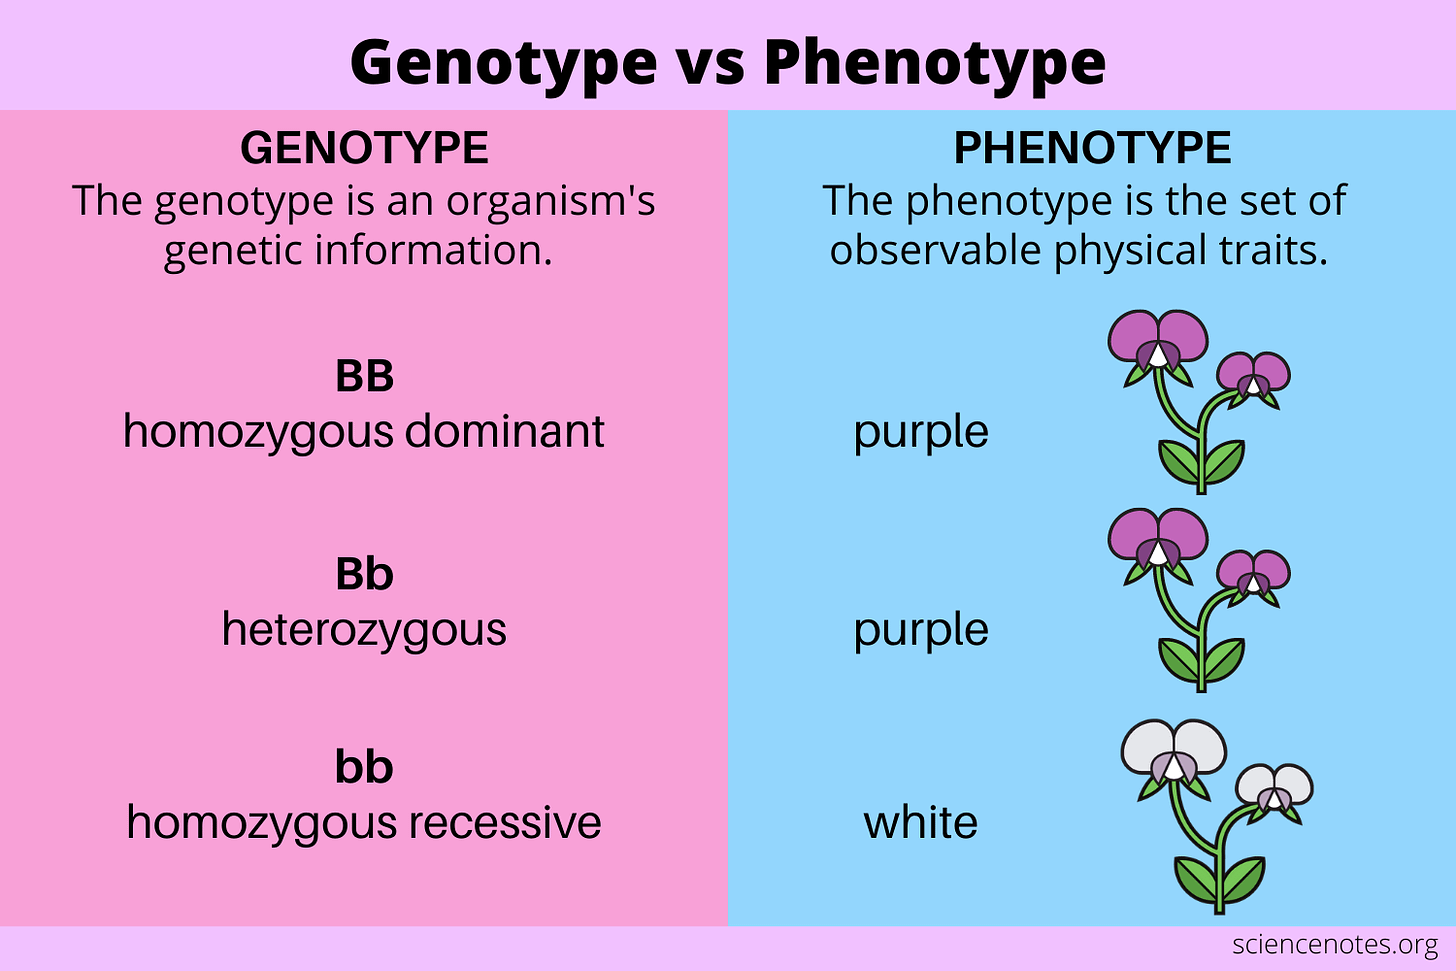 Genotype vs Phenotype - Definitions and Examples